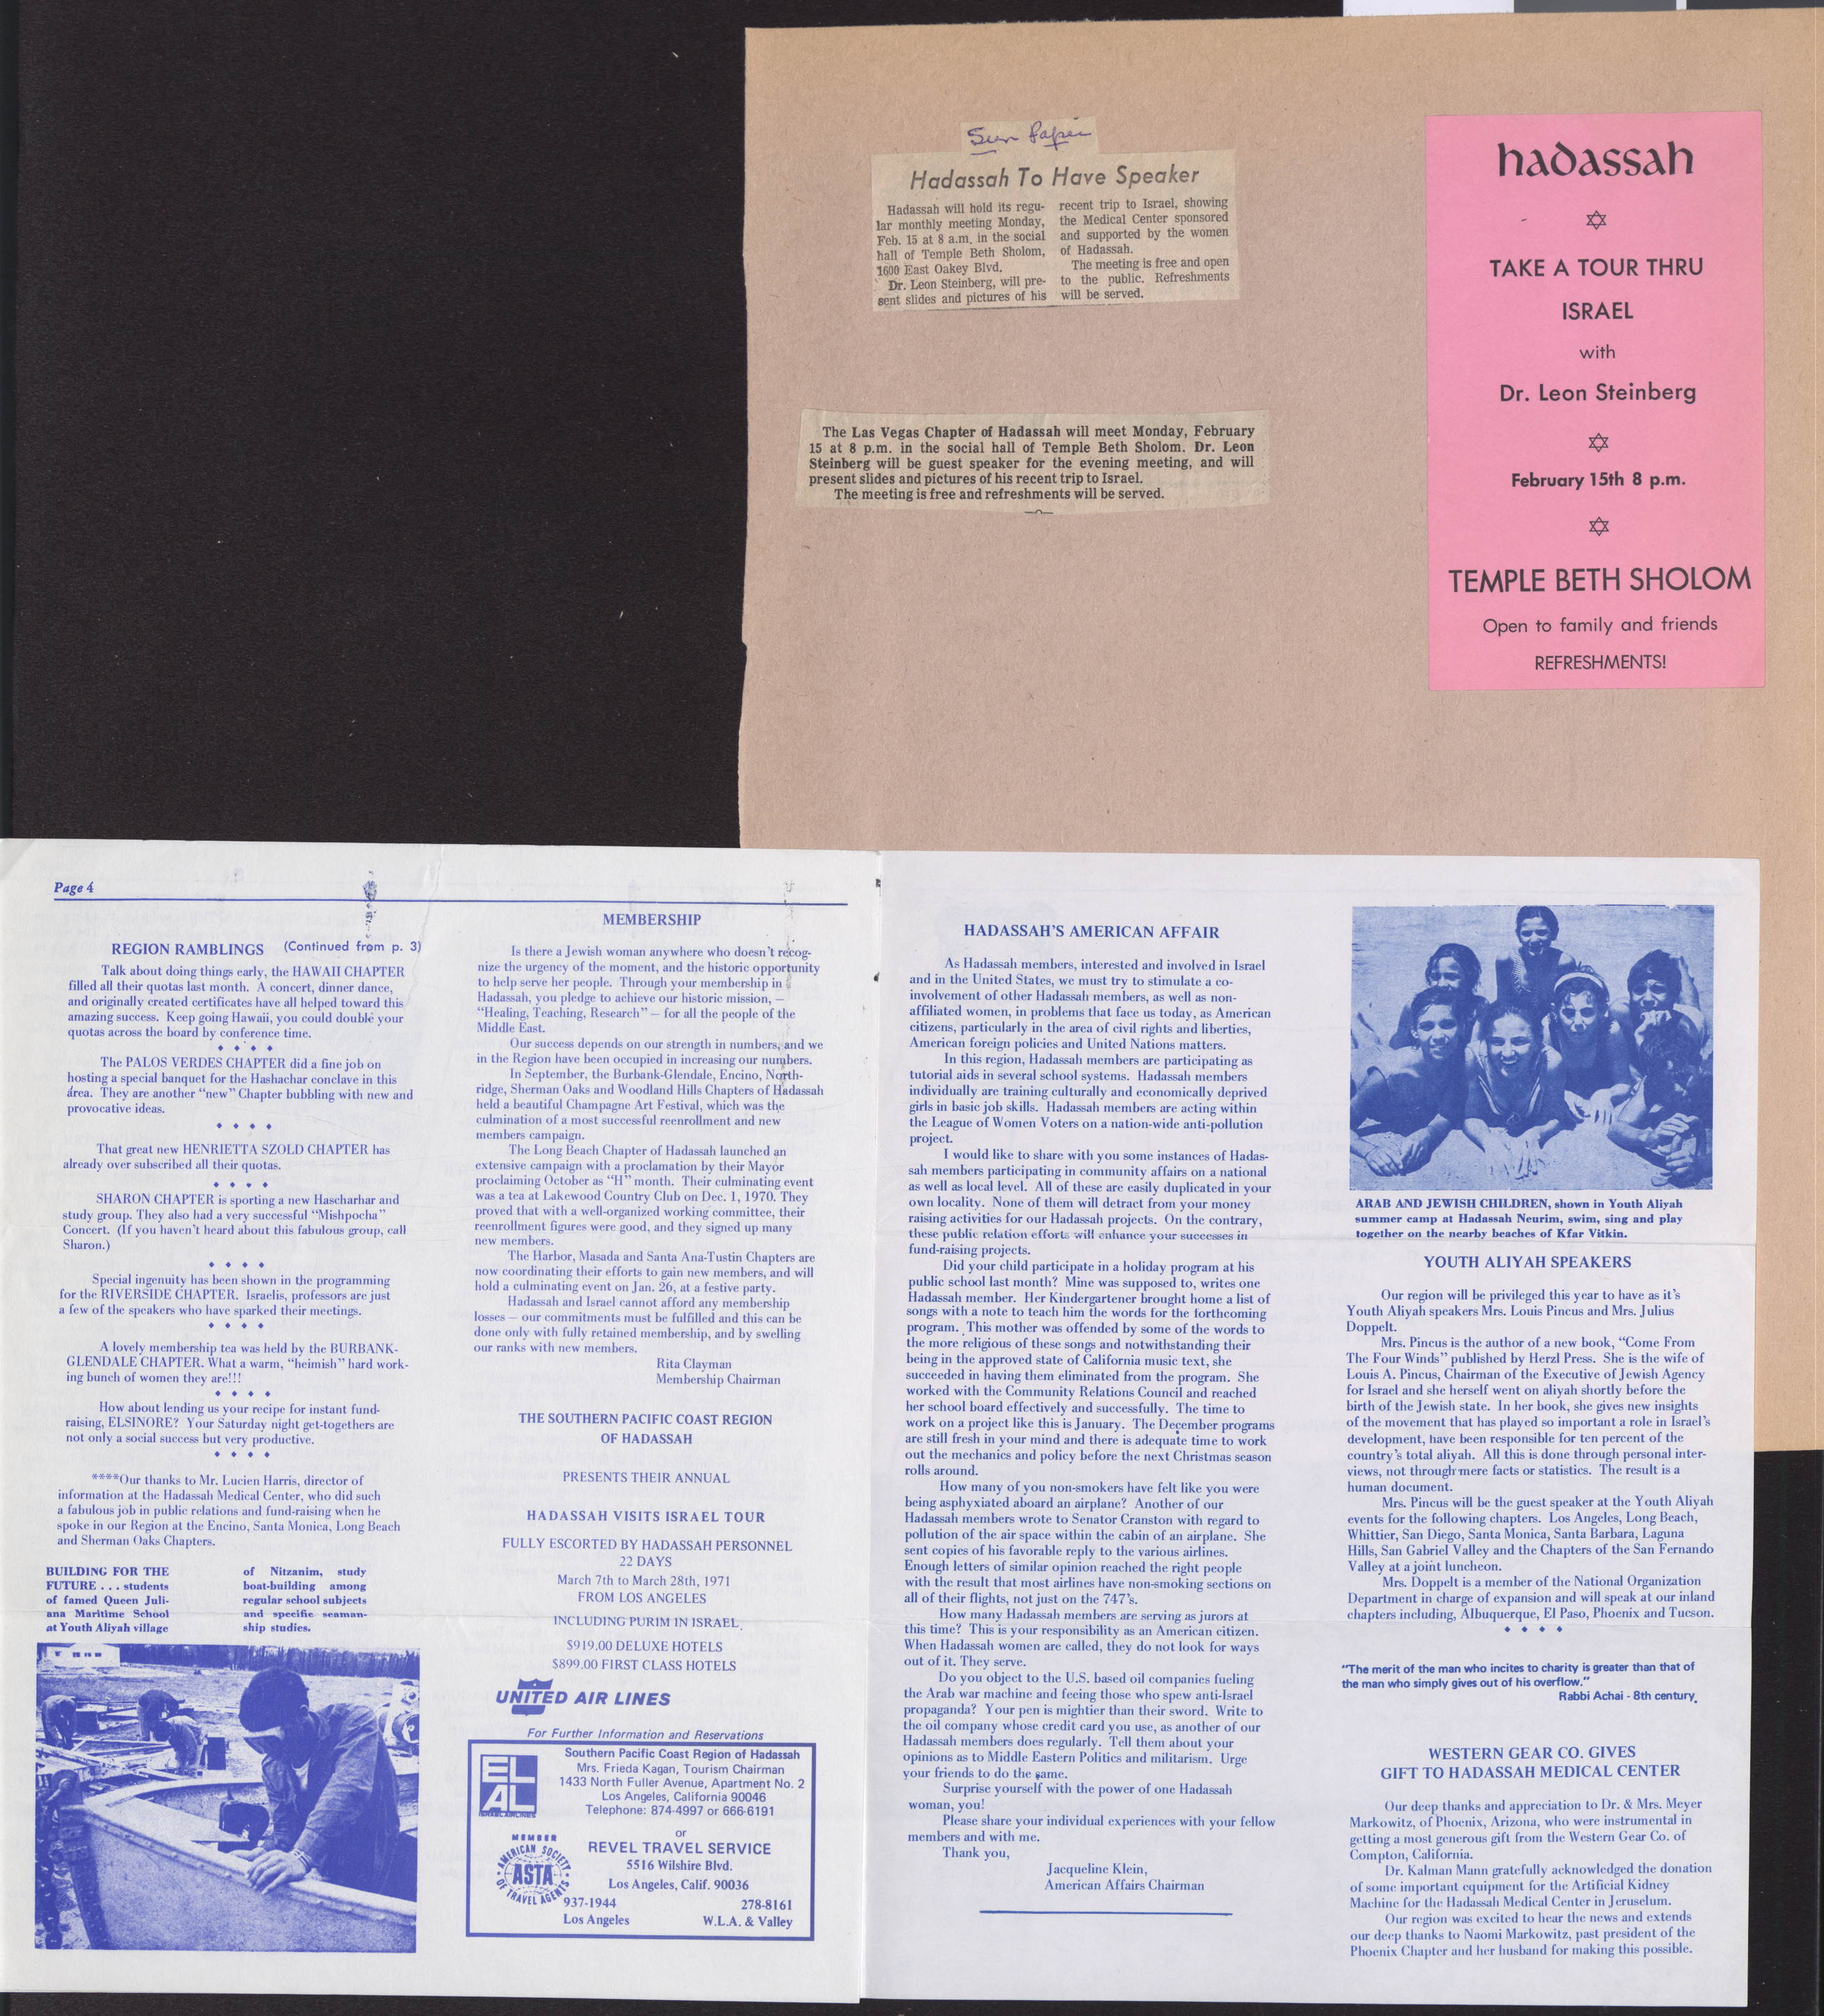 Hadassah News, Southern Pacific Coast Region, January 1971, pages 4-5